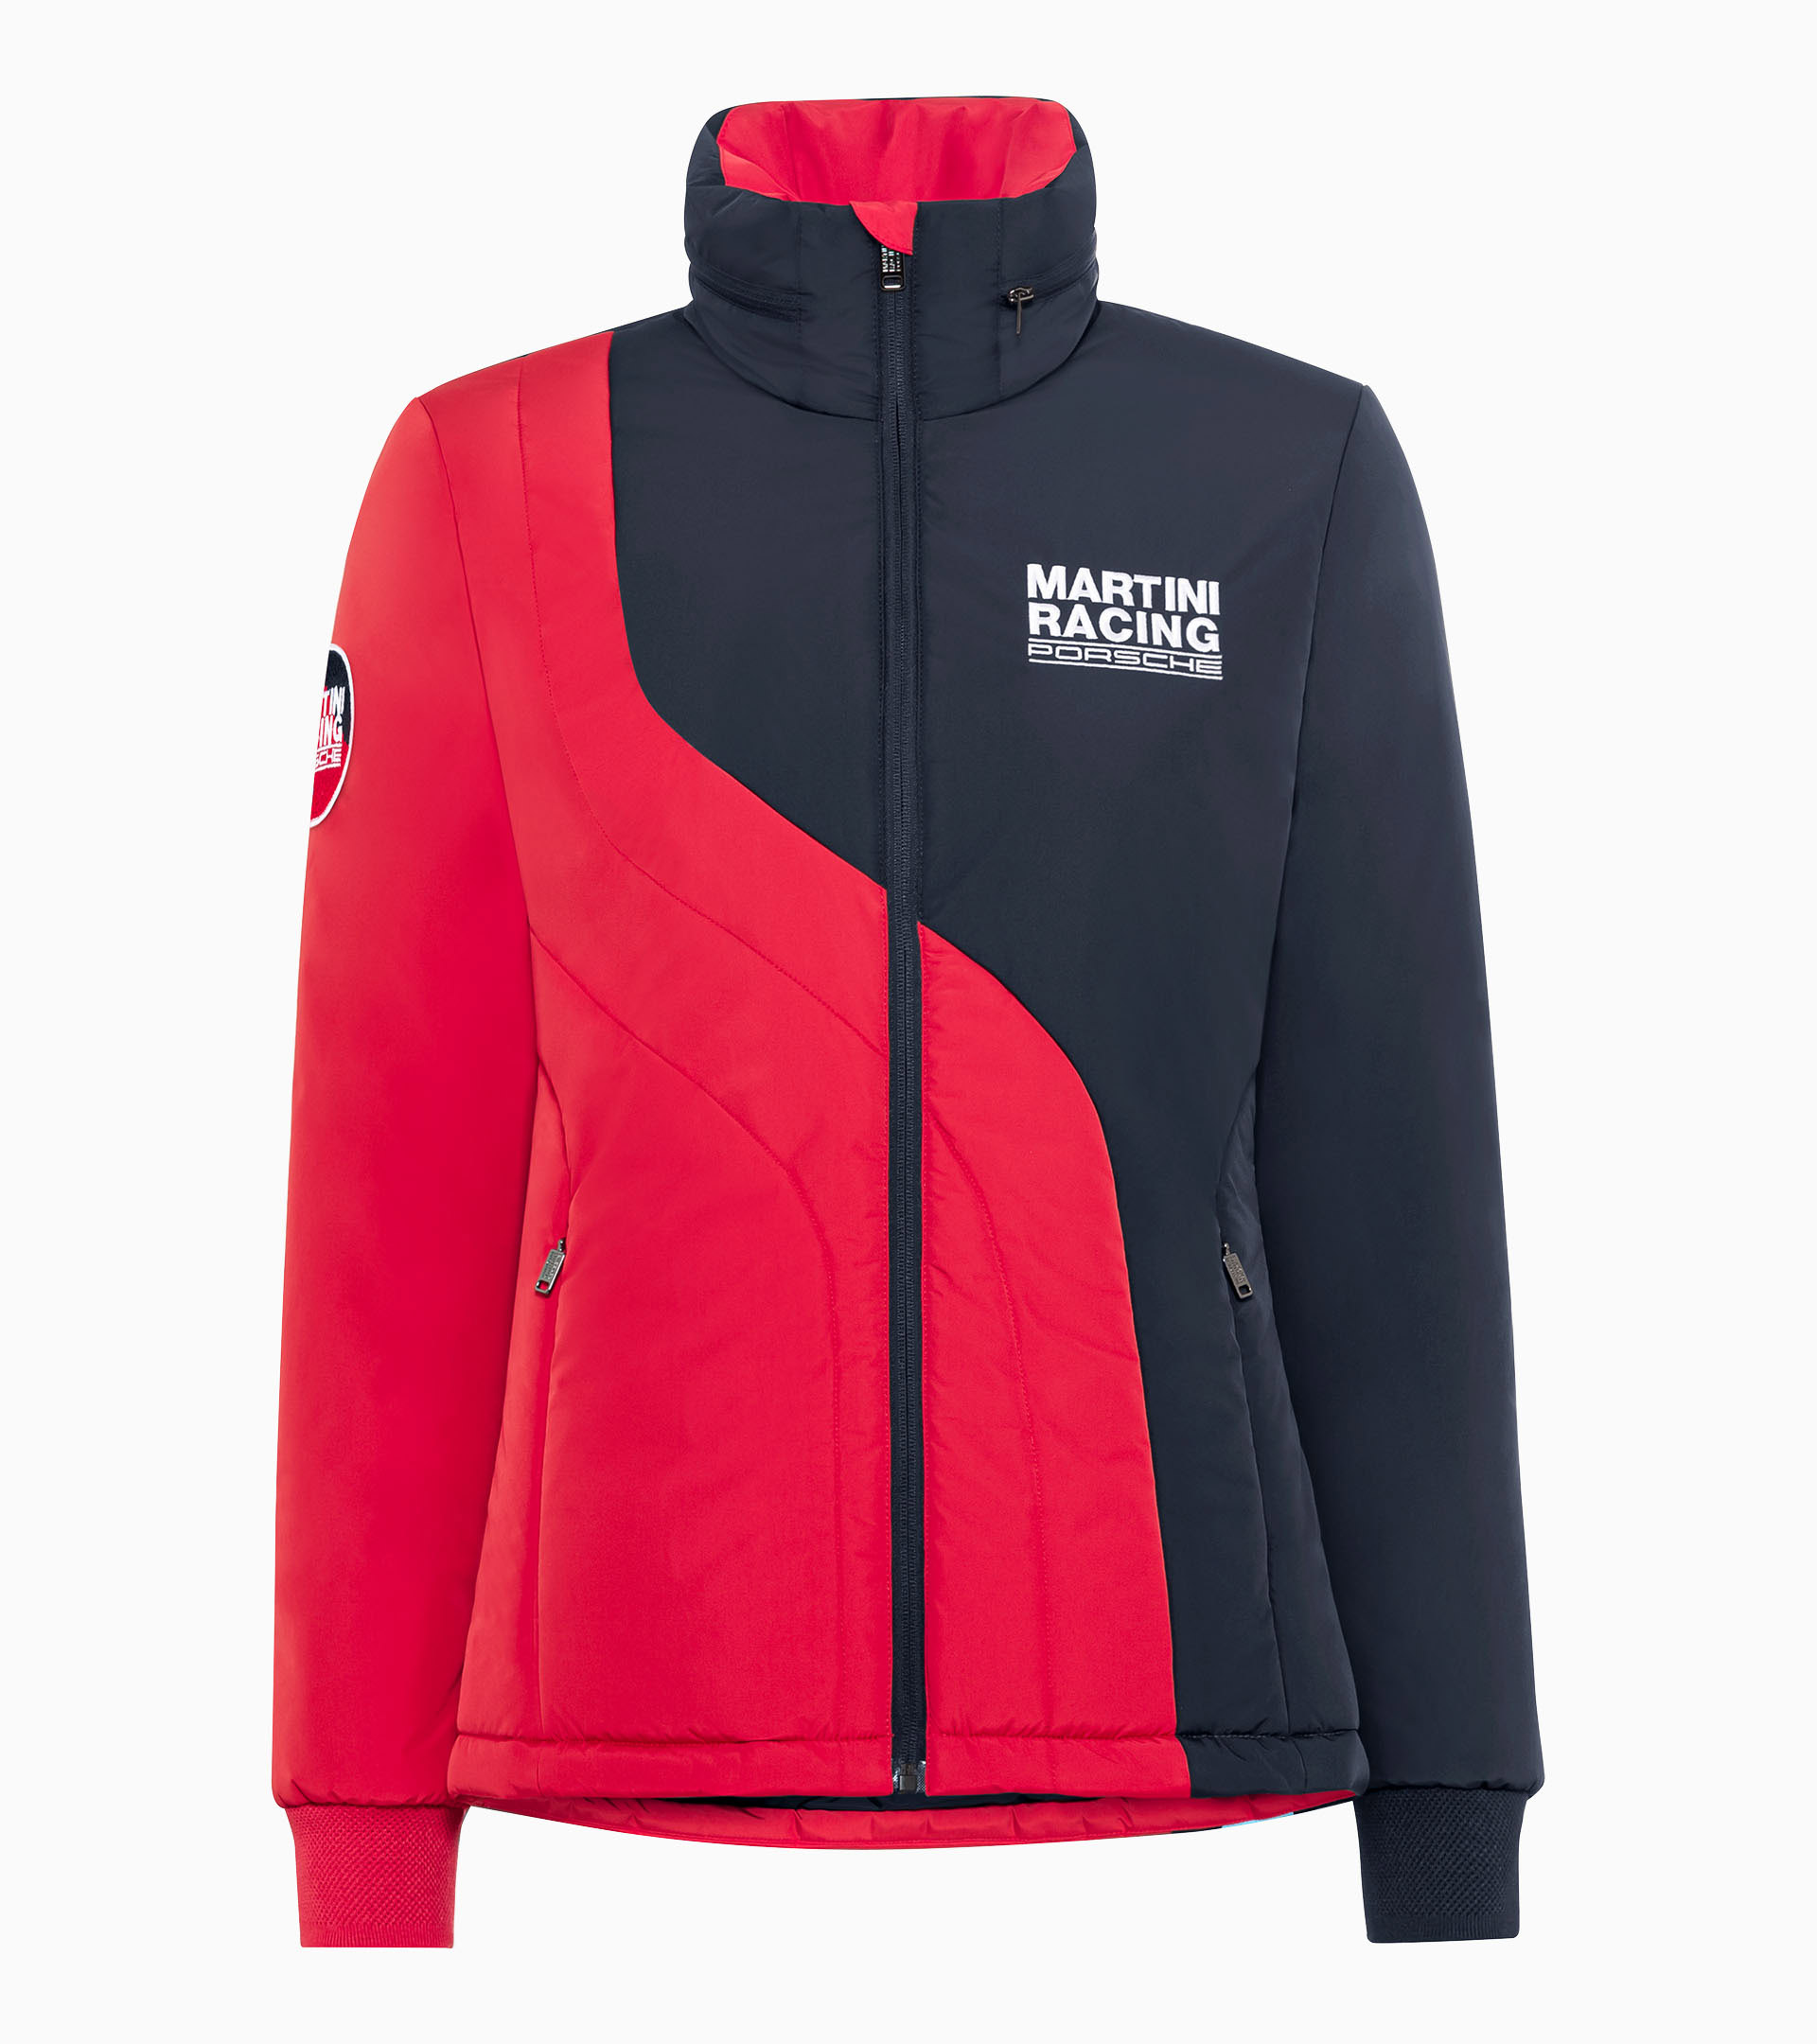 MARTINI Racing Women's Quilted Jacket zoom